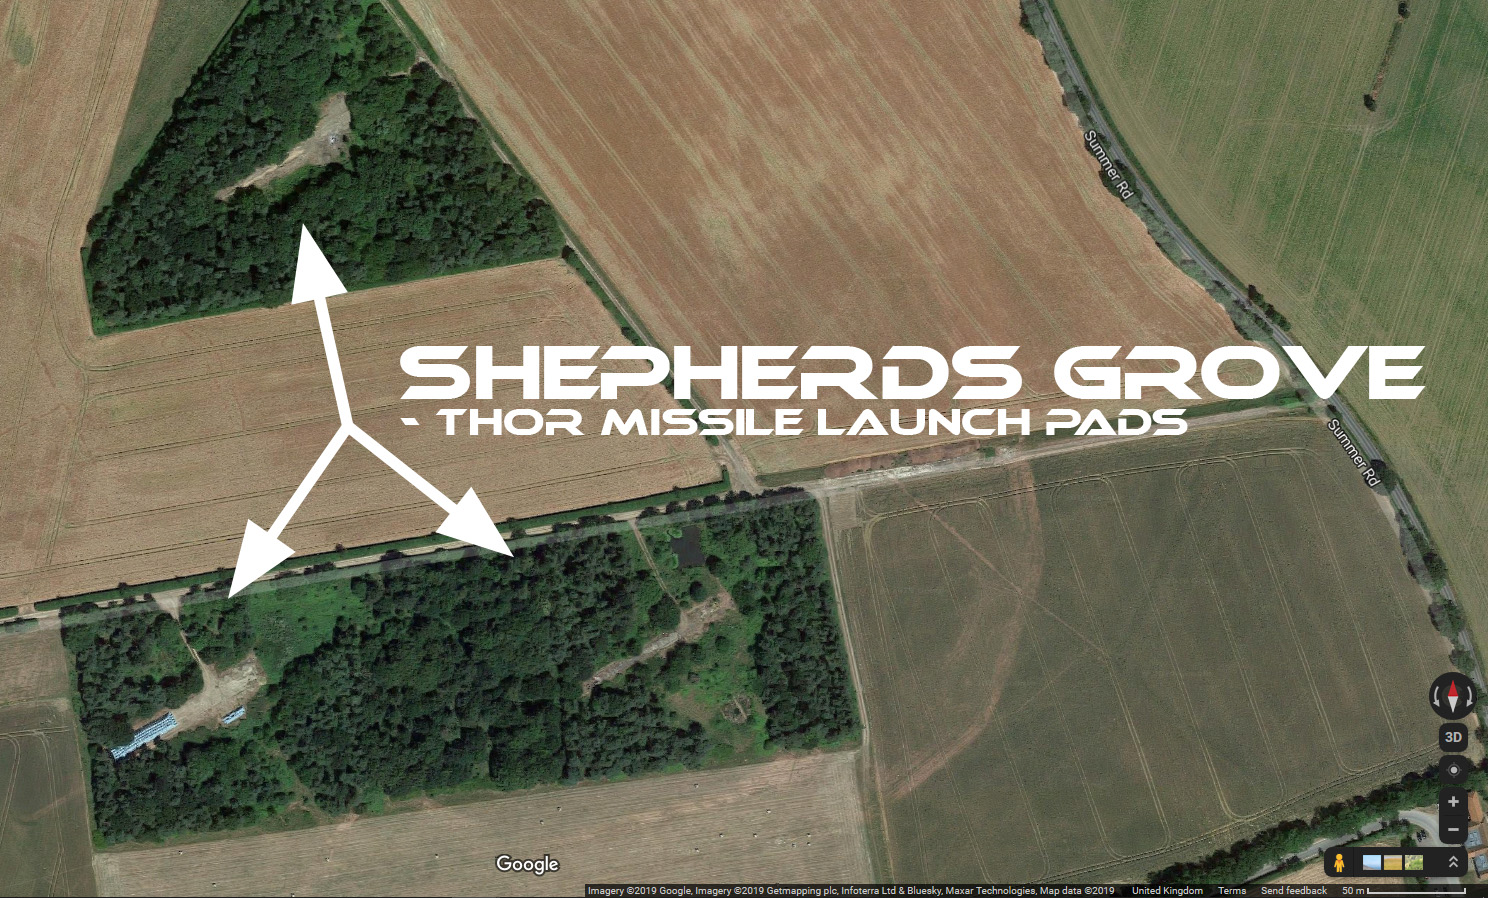 Thor missile launch pads